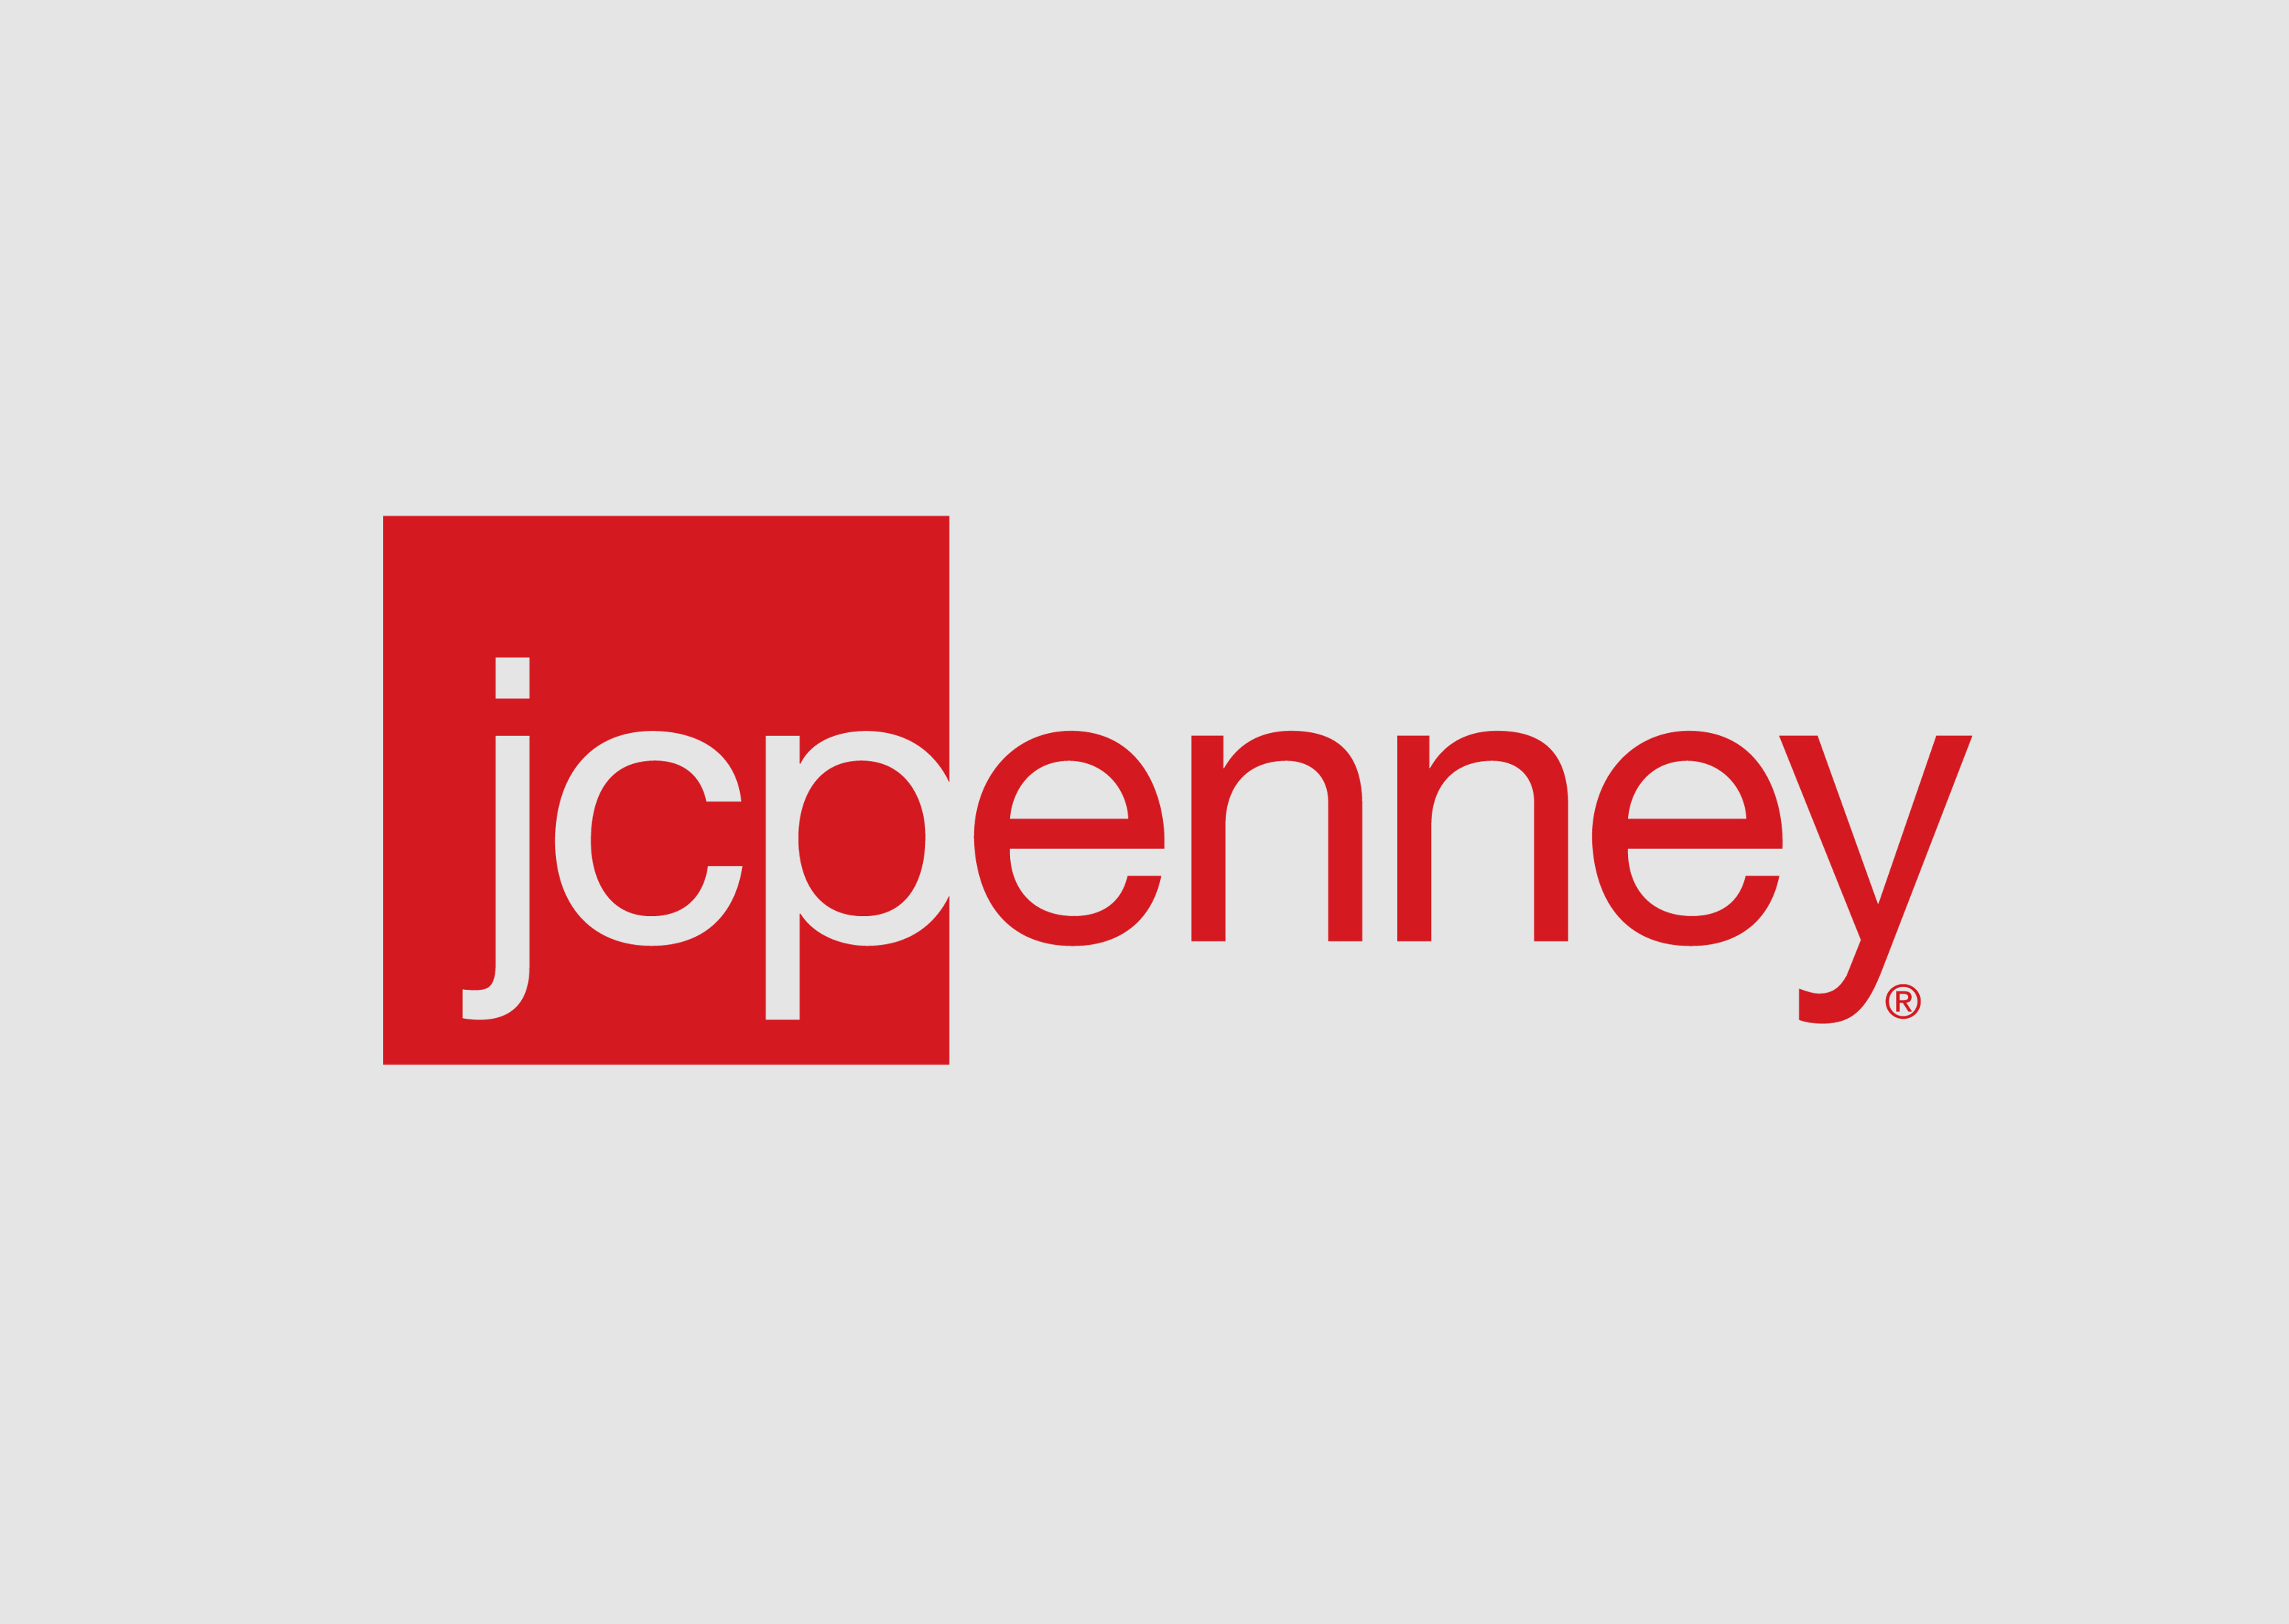 /stores/m/jcpenney.com.jpg